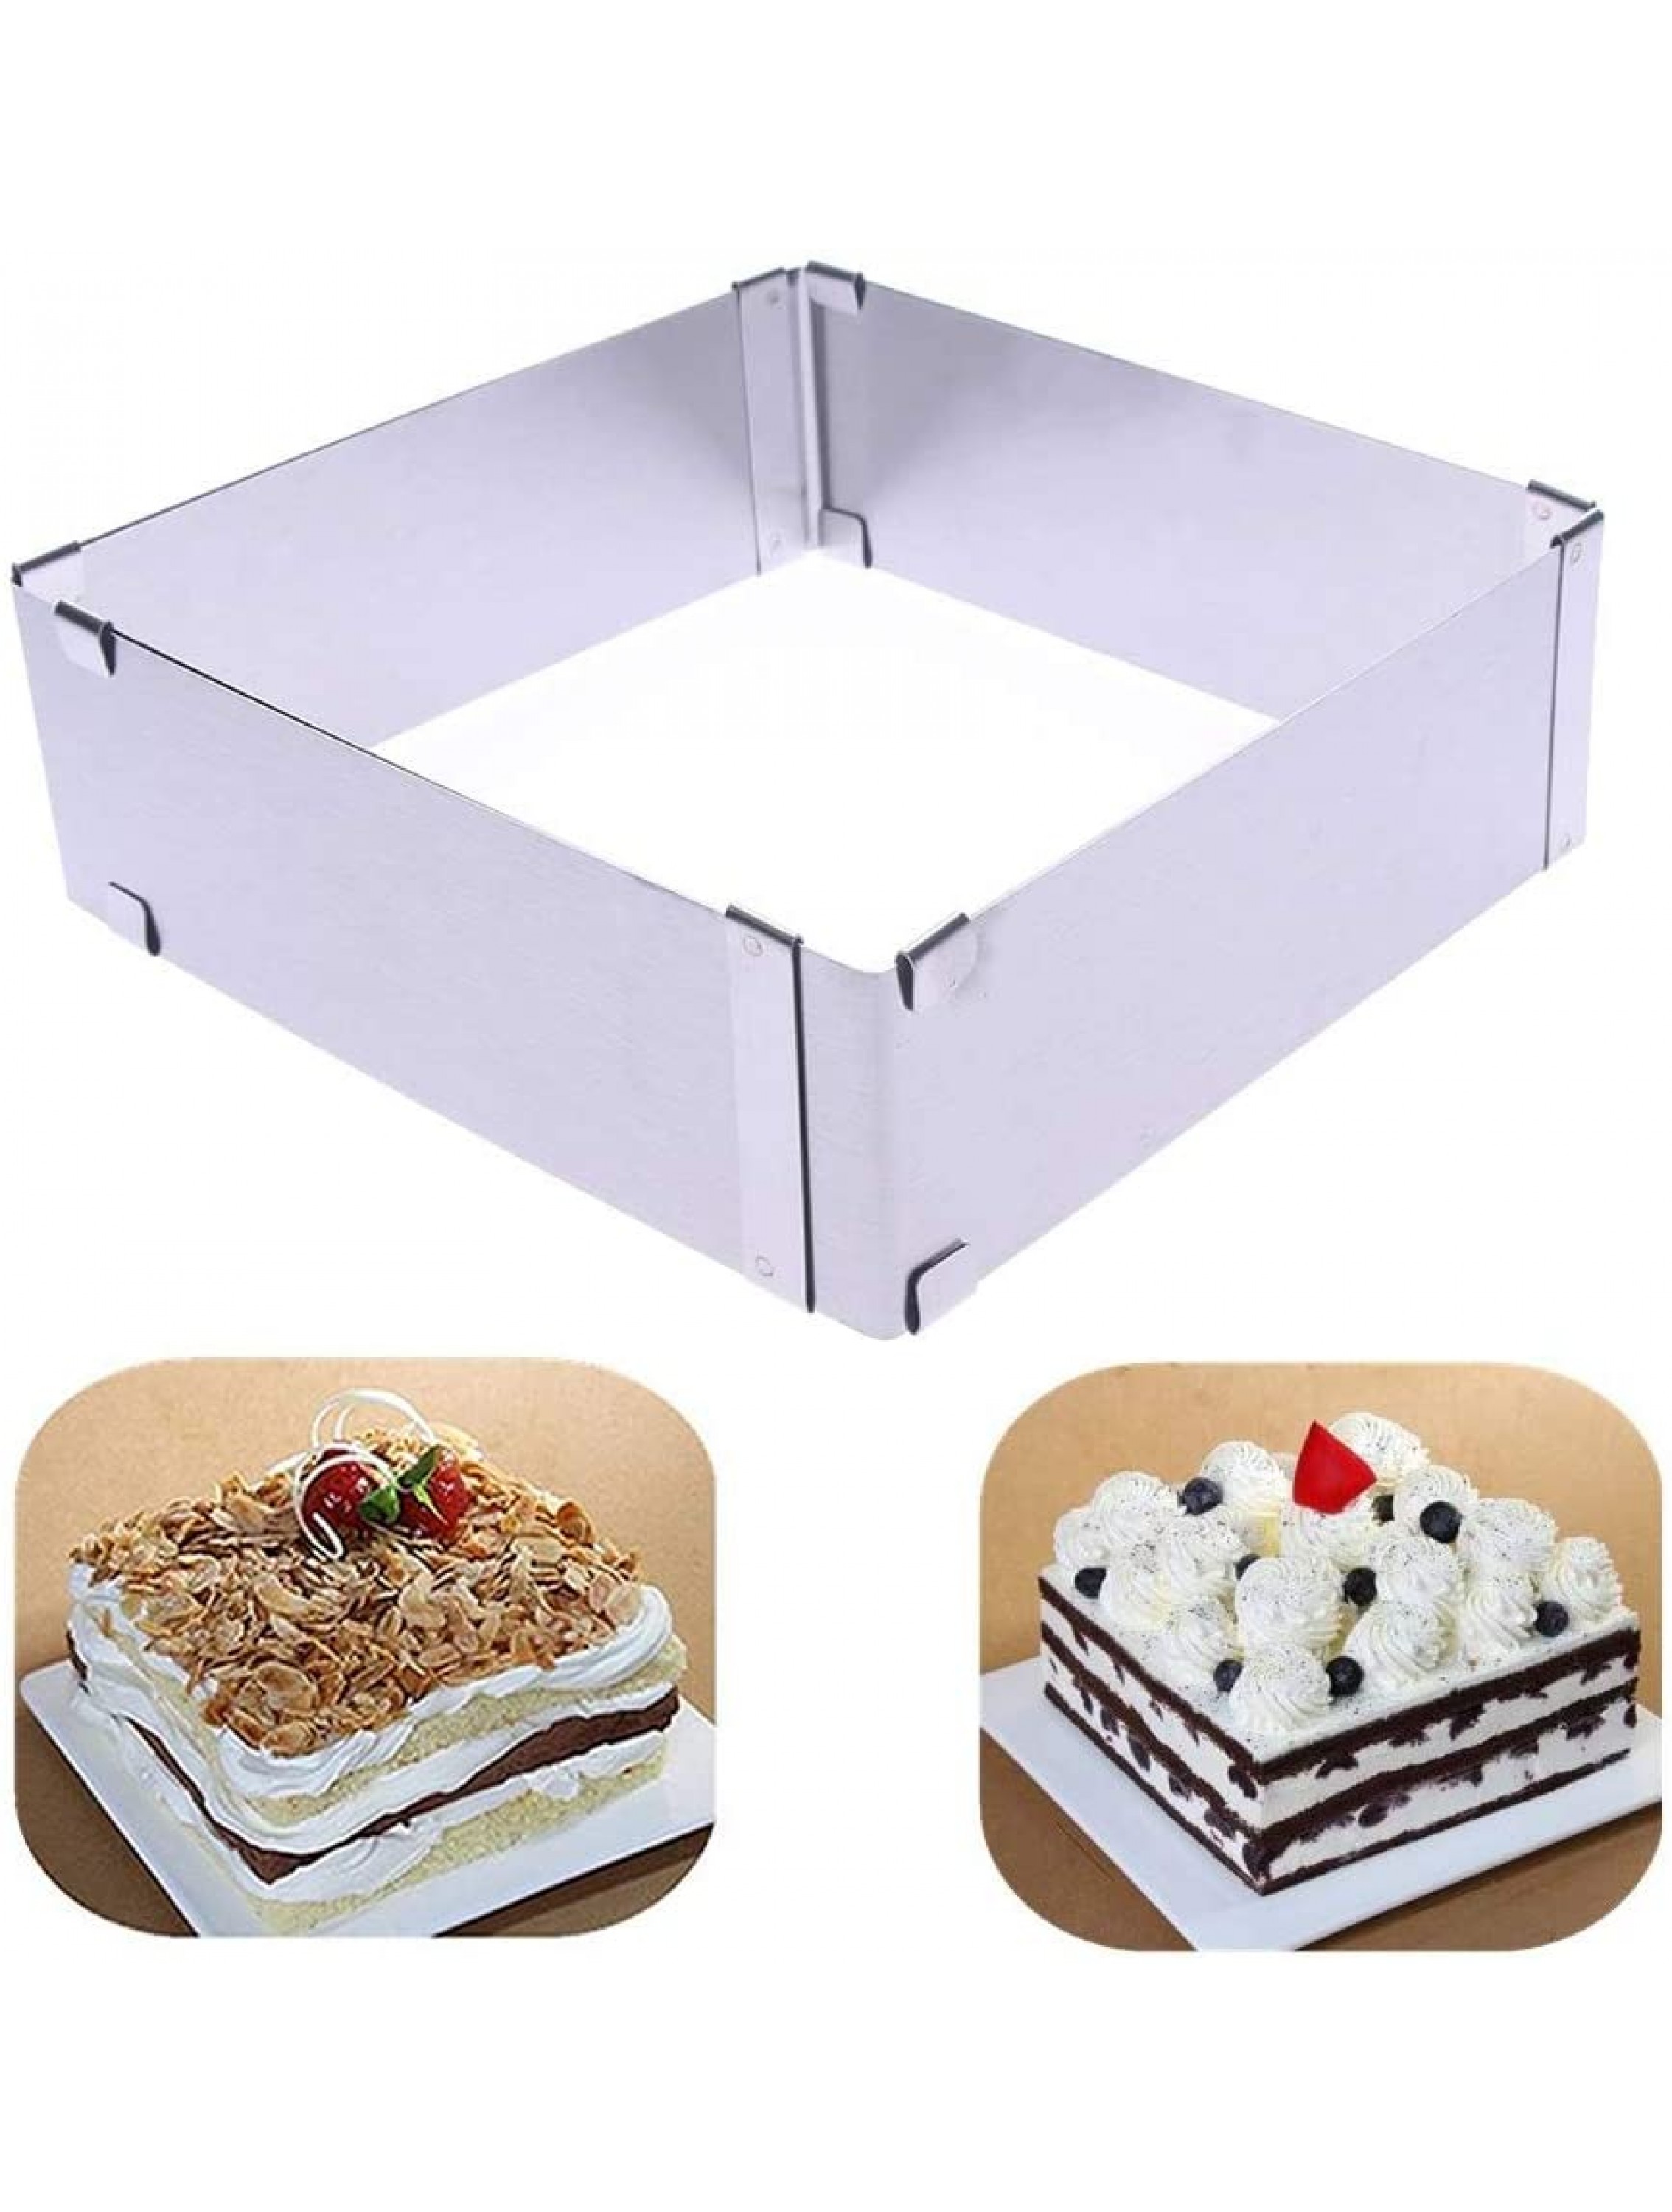 TXIN Stainless Steel Cake Ring Square Cake Mousse Mold Ring Cutter Adjustable from 6 inch to 11 inch - B1FXQGYXN